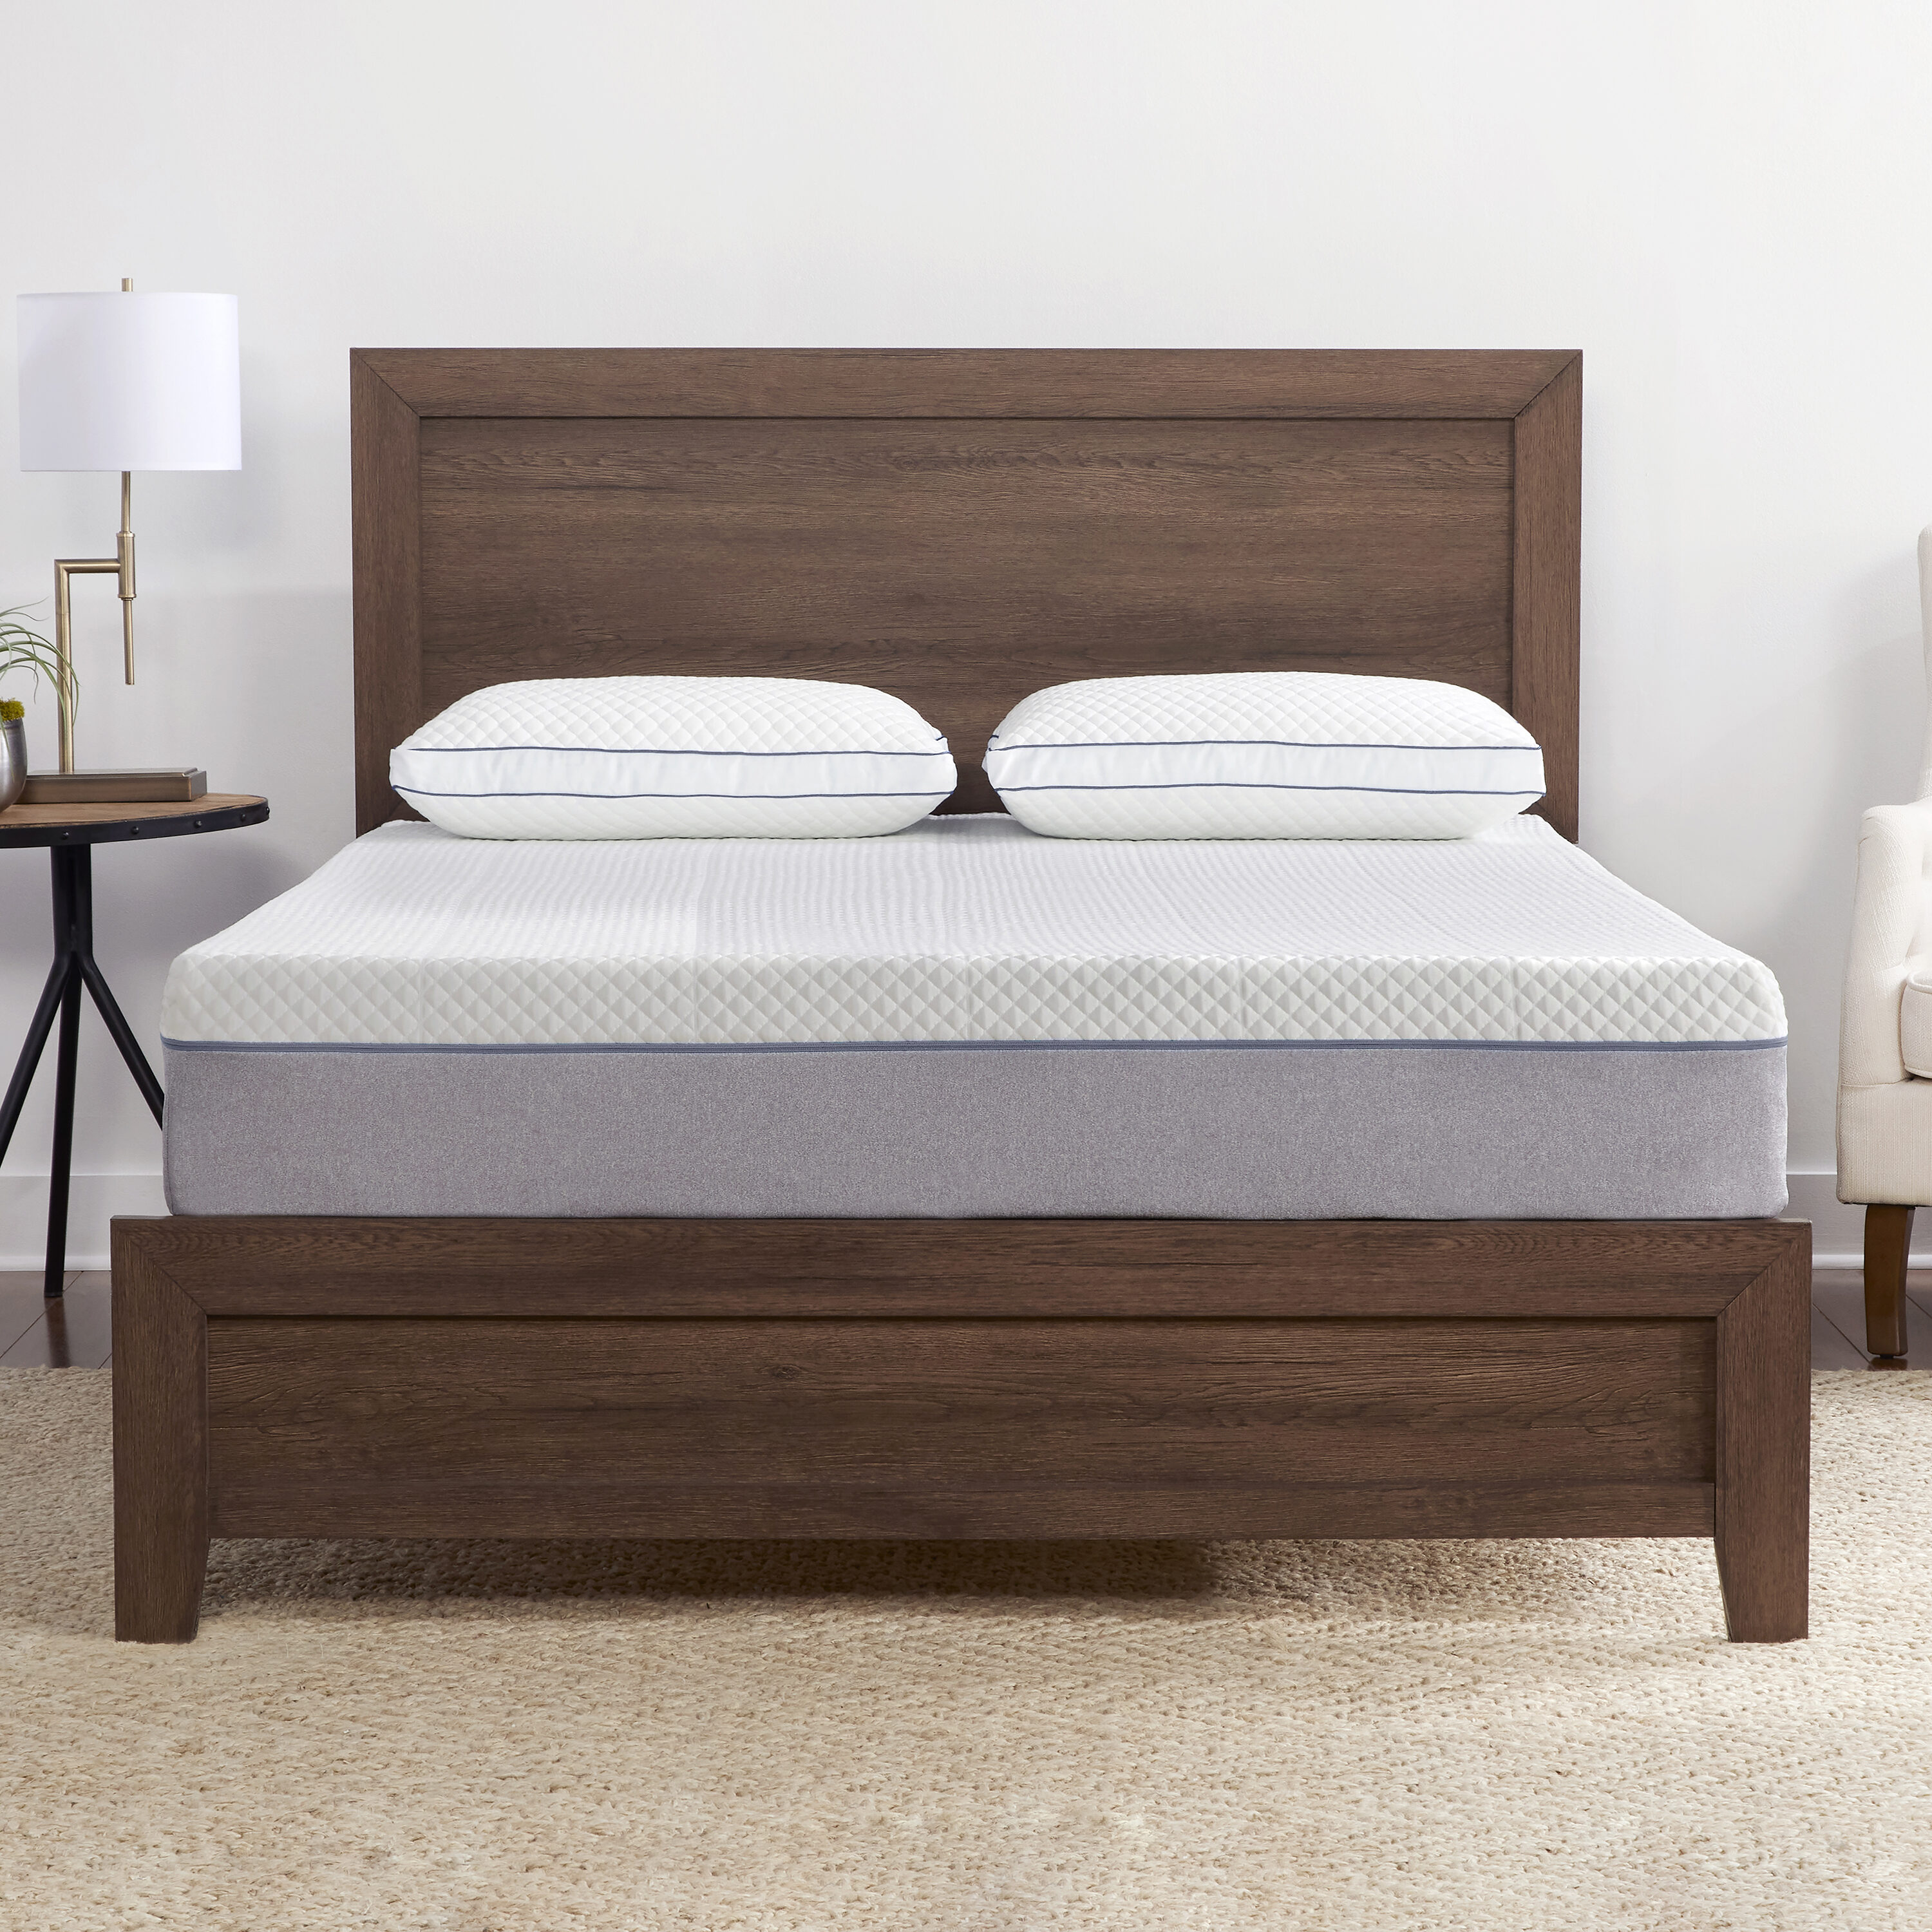 Style Selections 10-in King Memory Foam Mattress in a Box at Lowes.com